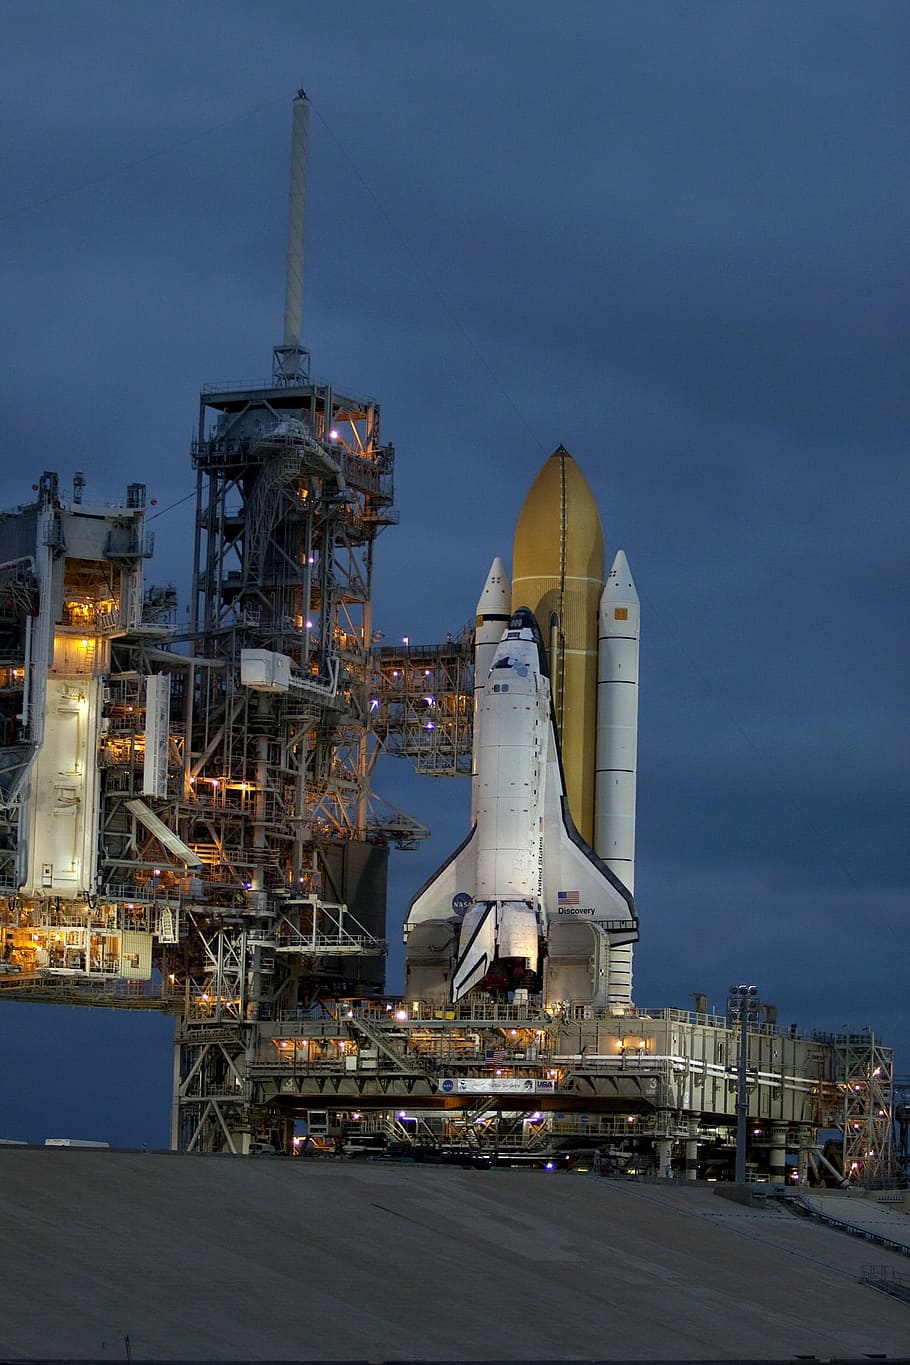 white, brown, rocket, launching, pad, discovery space shuttle, rollout, launch pad, pre-launch, astronaut